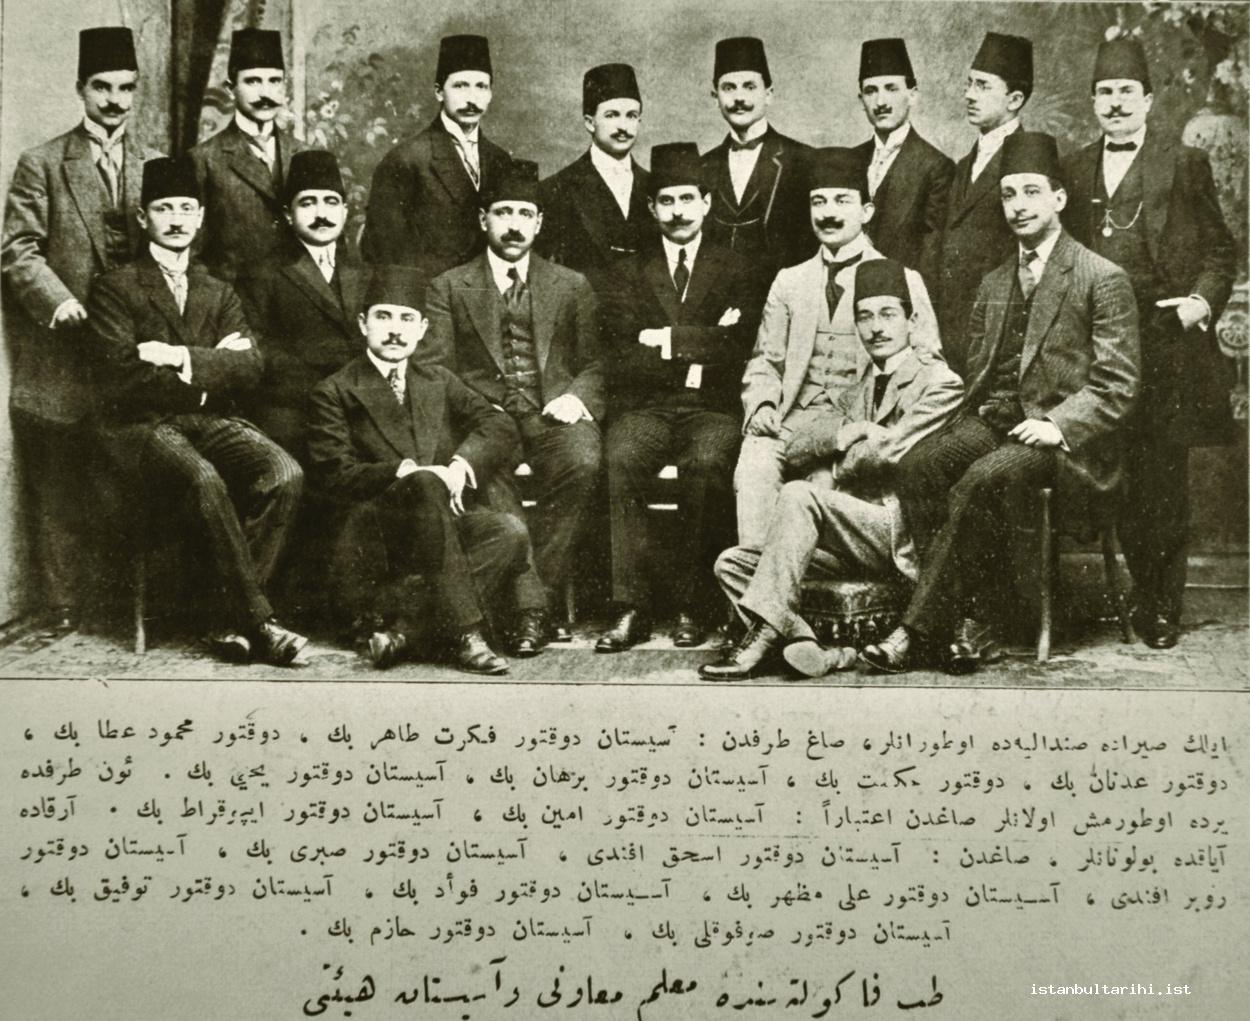 16- The staff of Medical school in 1910: “Those standing in the first row from right to left Assistant Doctor Fikret Tahir Bey, Doctor Mahmud Ata Bey, Doctor Adnan Bey,
    Doctor Hikmet Bey, Assistant Doctor Burhan Bey, Assistant Doctor Yahya Bey. Those sitting on the left from right Assistant Doctor Emin Bey, Assistant Doctor İpokrat? Bey.
    Those standing in the back from right Assistant Doctor İshak Efendi, Assistant Doctor Sabri Bey, Assistant Doctor Ruber Efendi, Assistant Doctor Ali Mazhar Bey, Assistant
    Doctor Fuad Bey, Assistant Doctor Tevfik Bey, Assistant Doctor Sufugli? Bey, Assistant Doctor Hazım Bey.” (Şehbal))